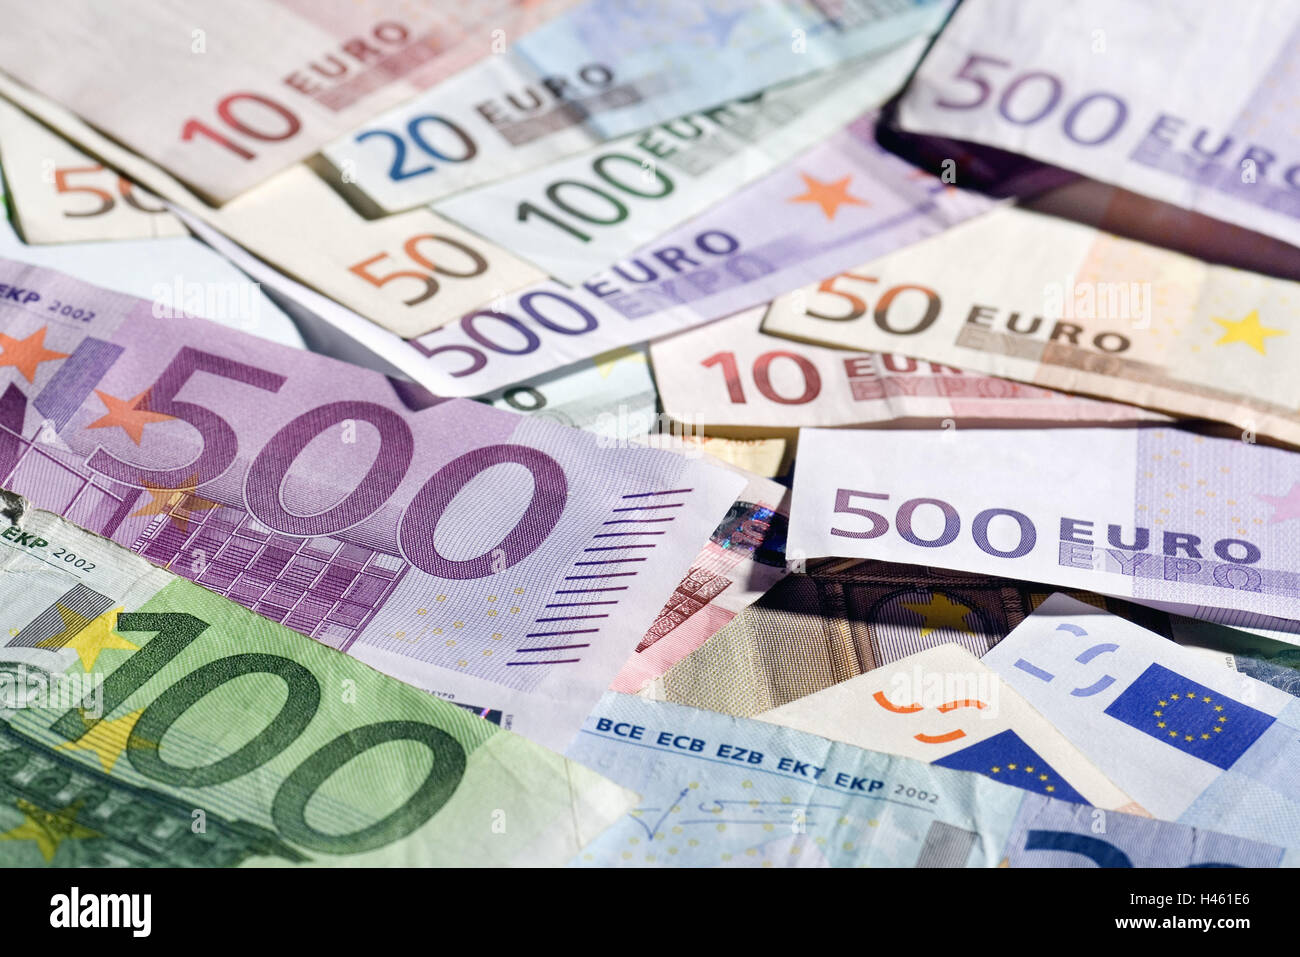 Banknotes, euro, passed away, bank notes, monetary currency, currency, euro, 5, 10, 20, 50, 100, 500, means payment, euronotes, euro banknotes, notes, spread, cash, finances, notch, Stock Photo